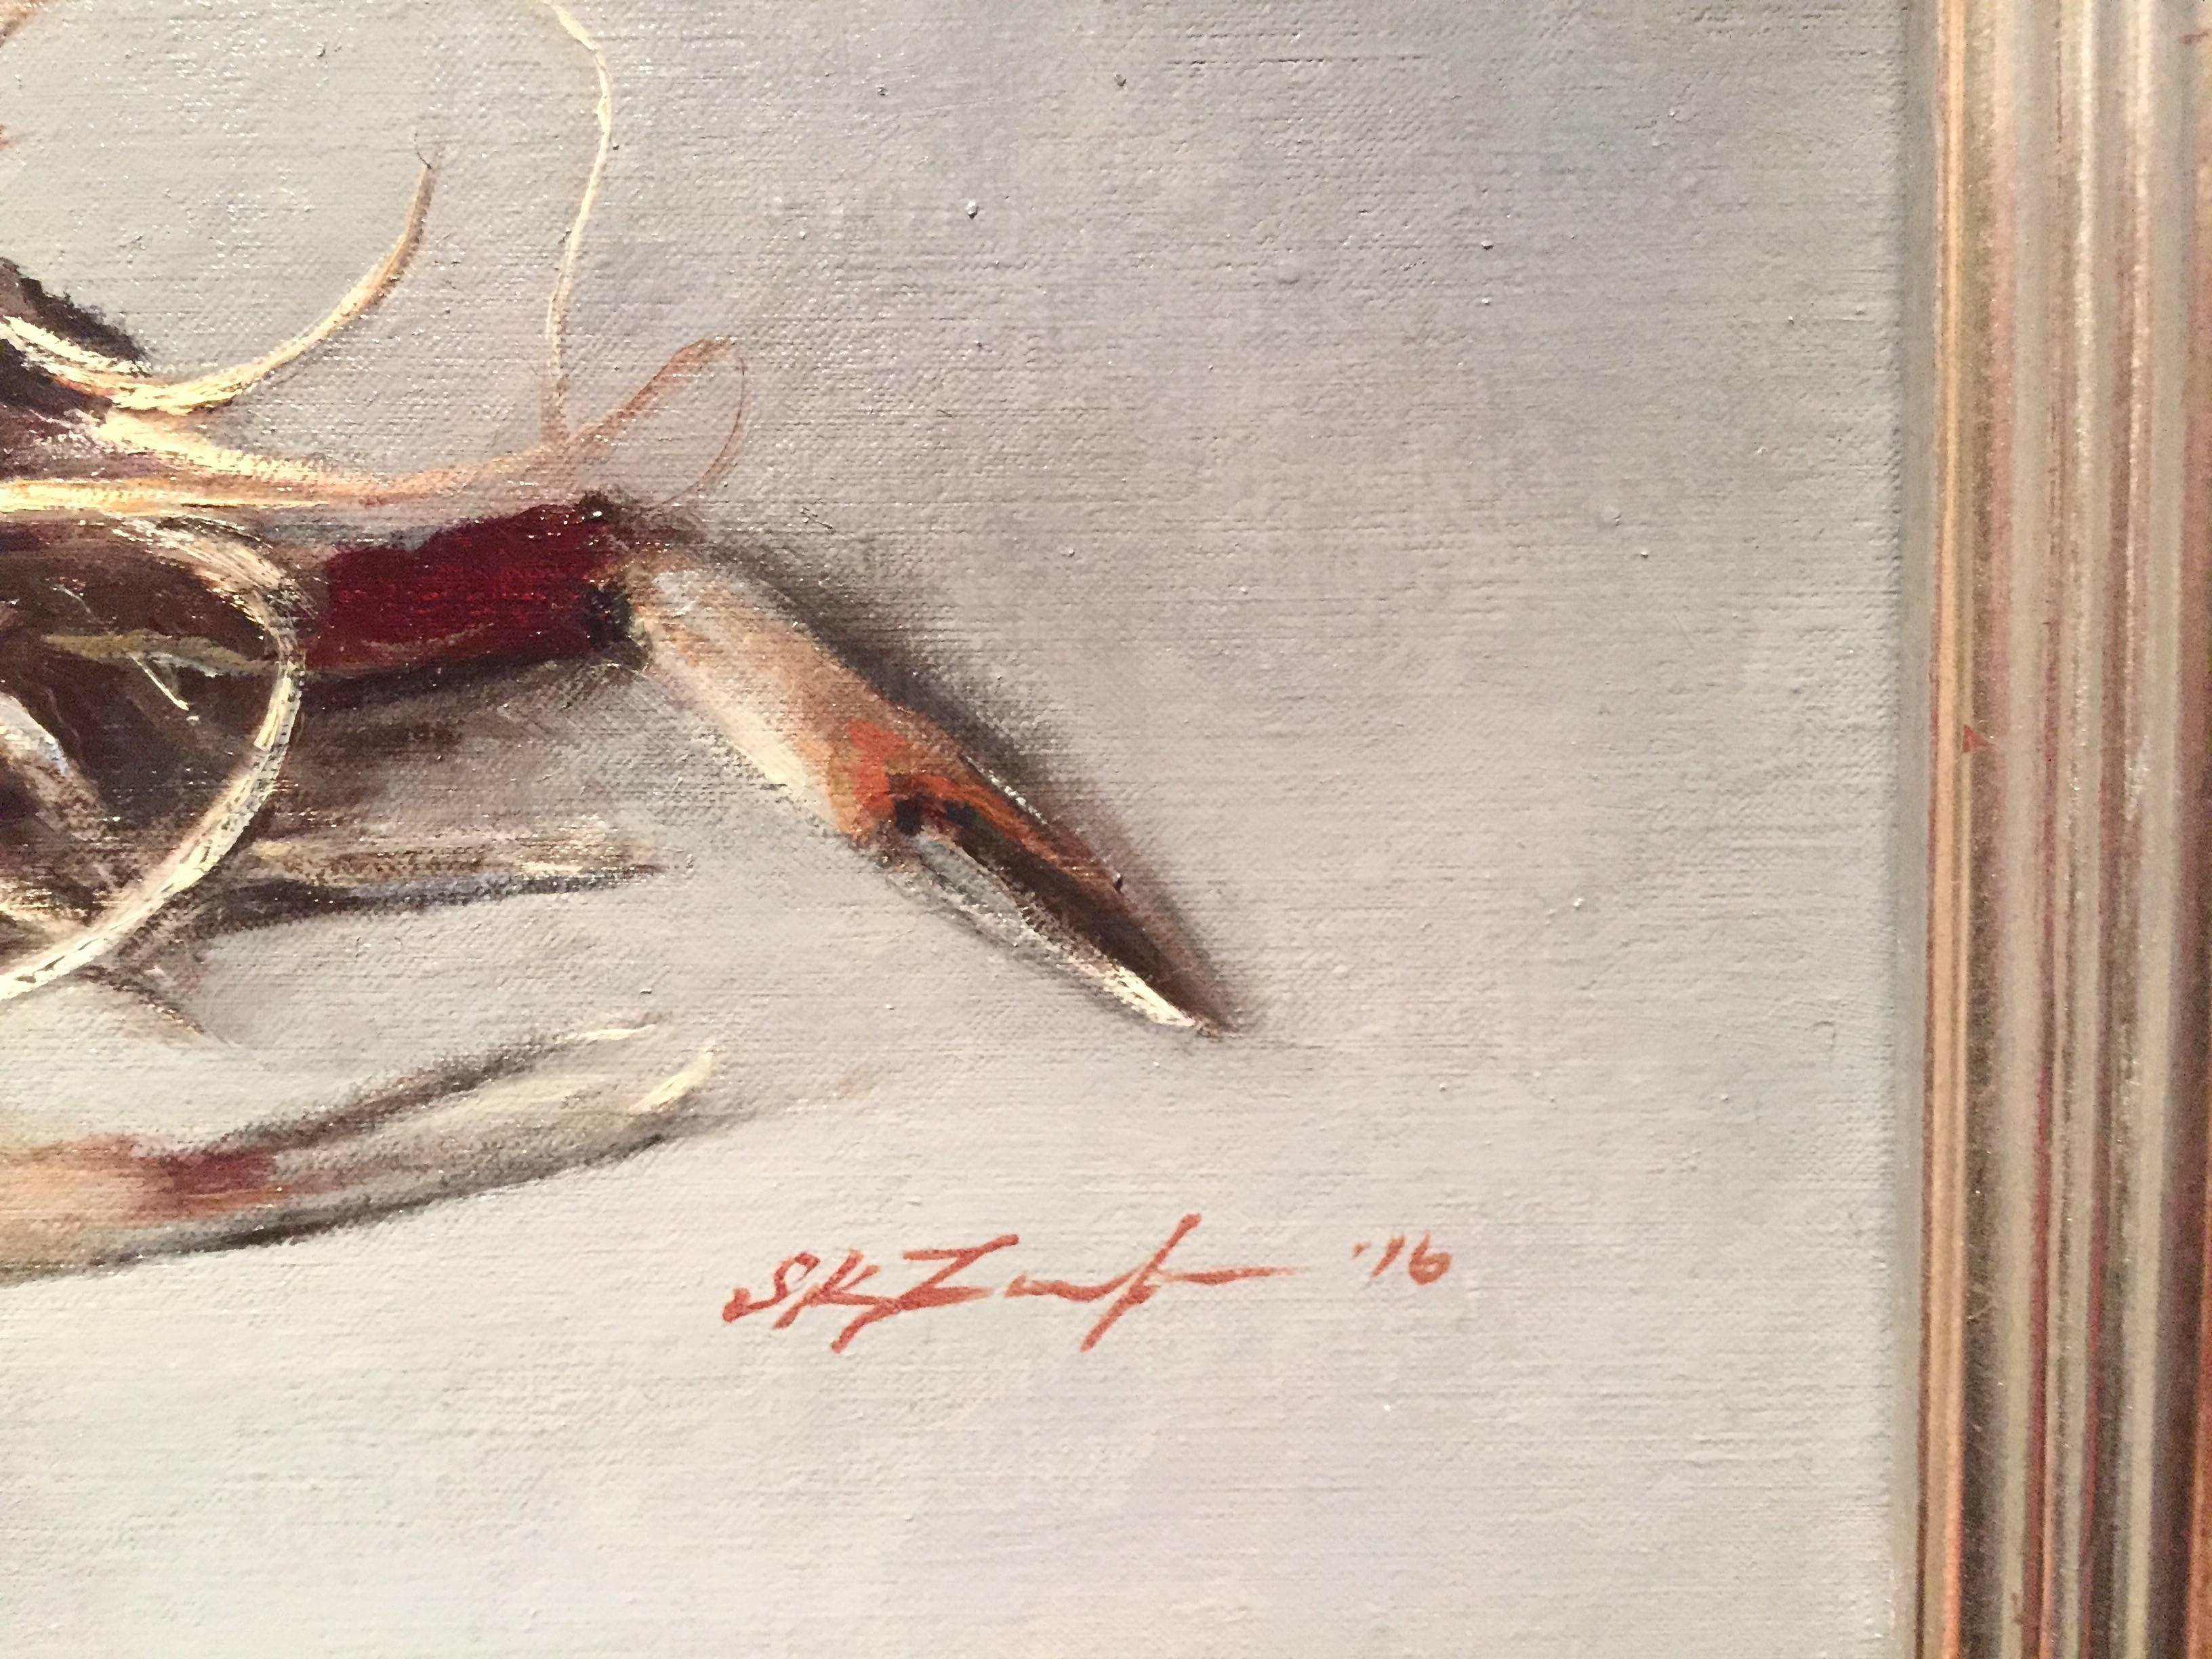 This oil on linen contemporary trompe l'oeil still life depicts a lonesome crustacean lays within a simple grey environment, arms reaching forward, antennae curving awry. 

Sarah Lamb is a talented and dynamic realist painter. With classical